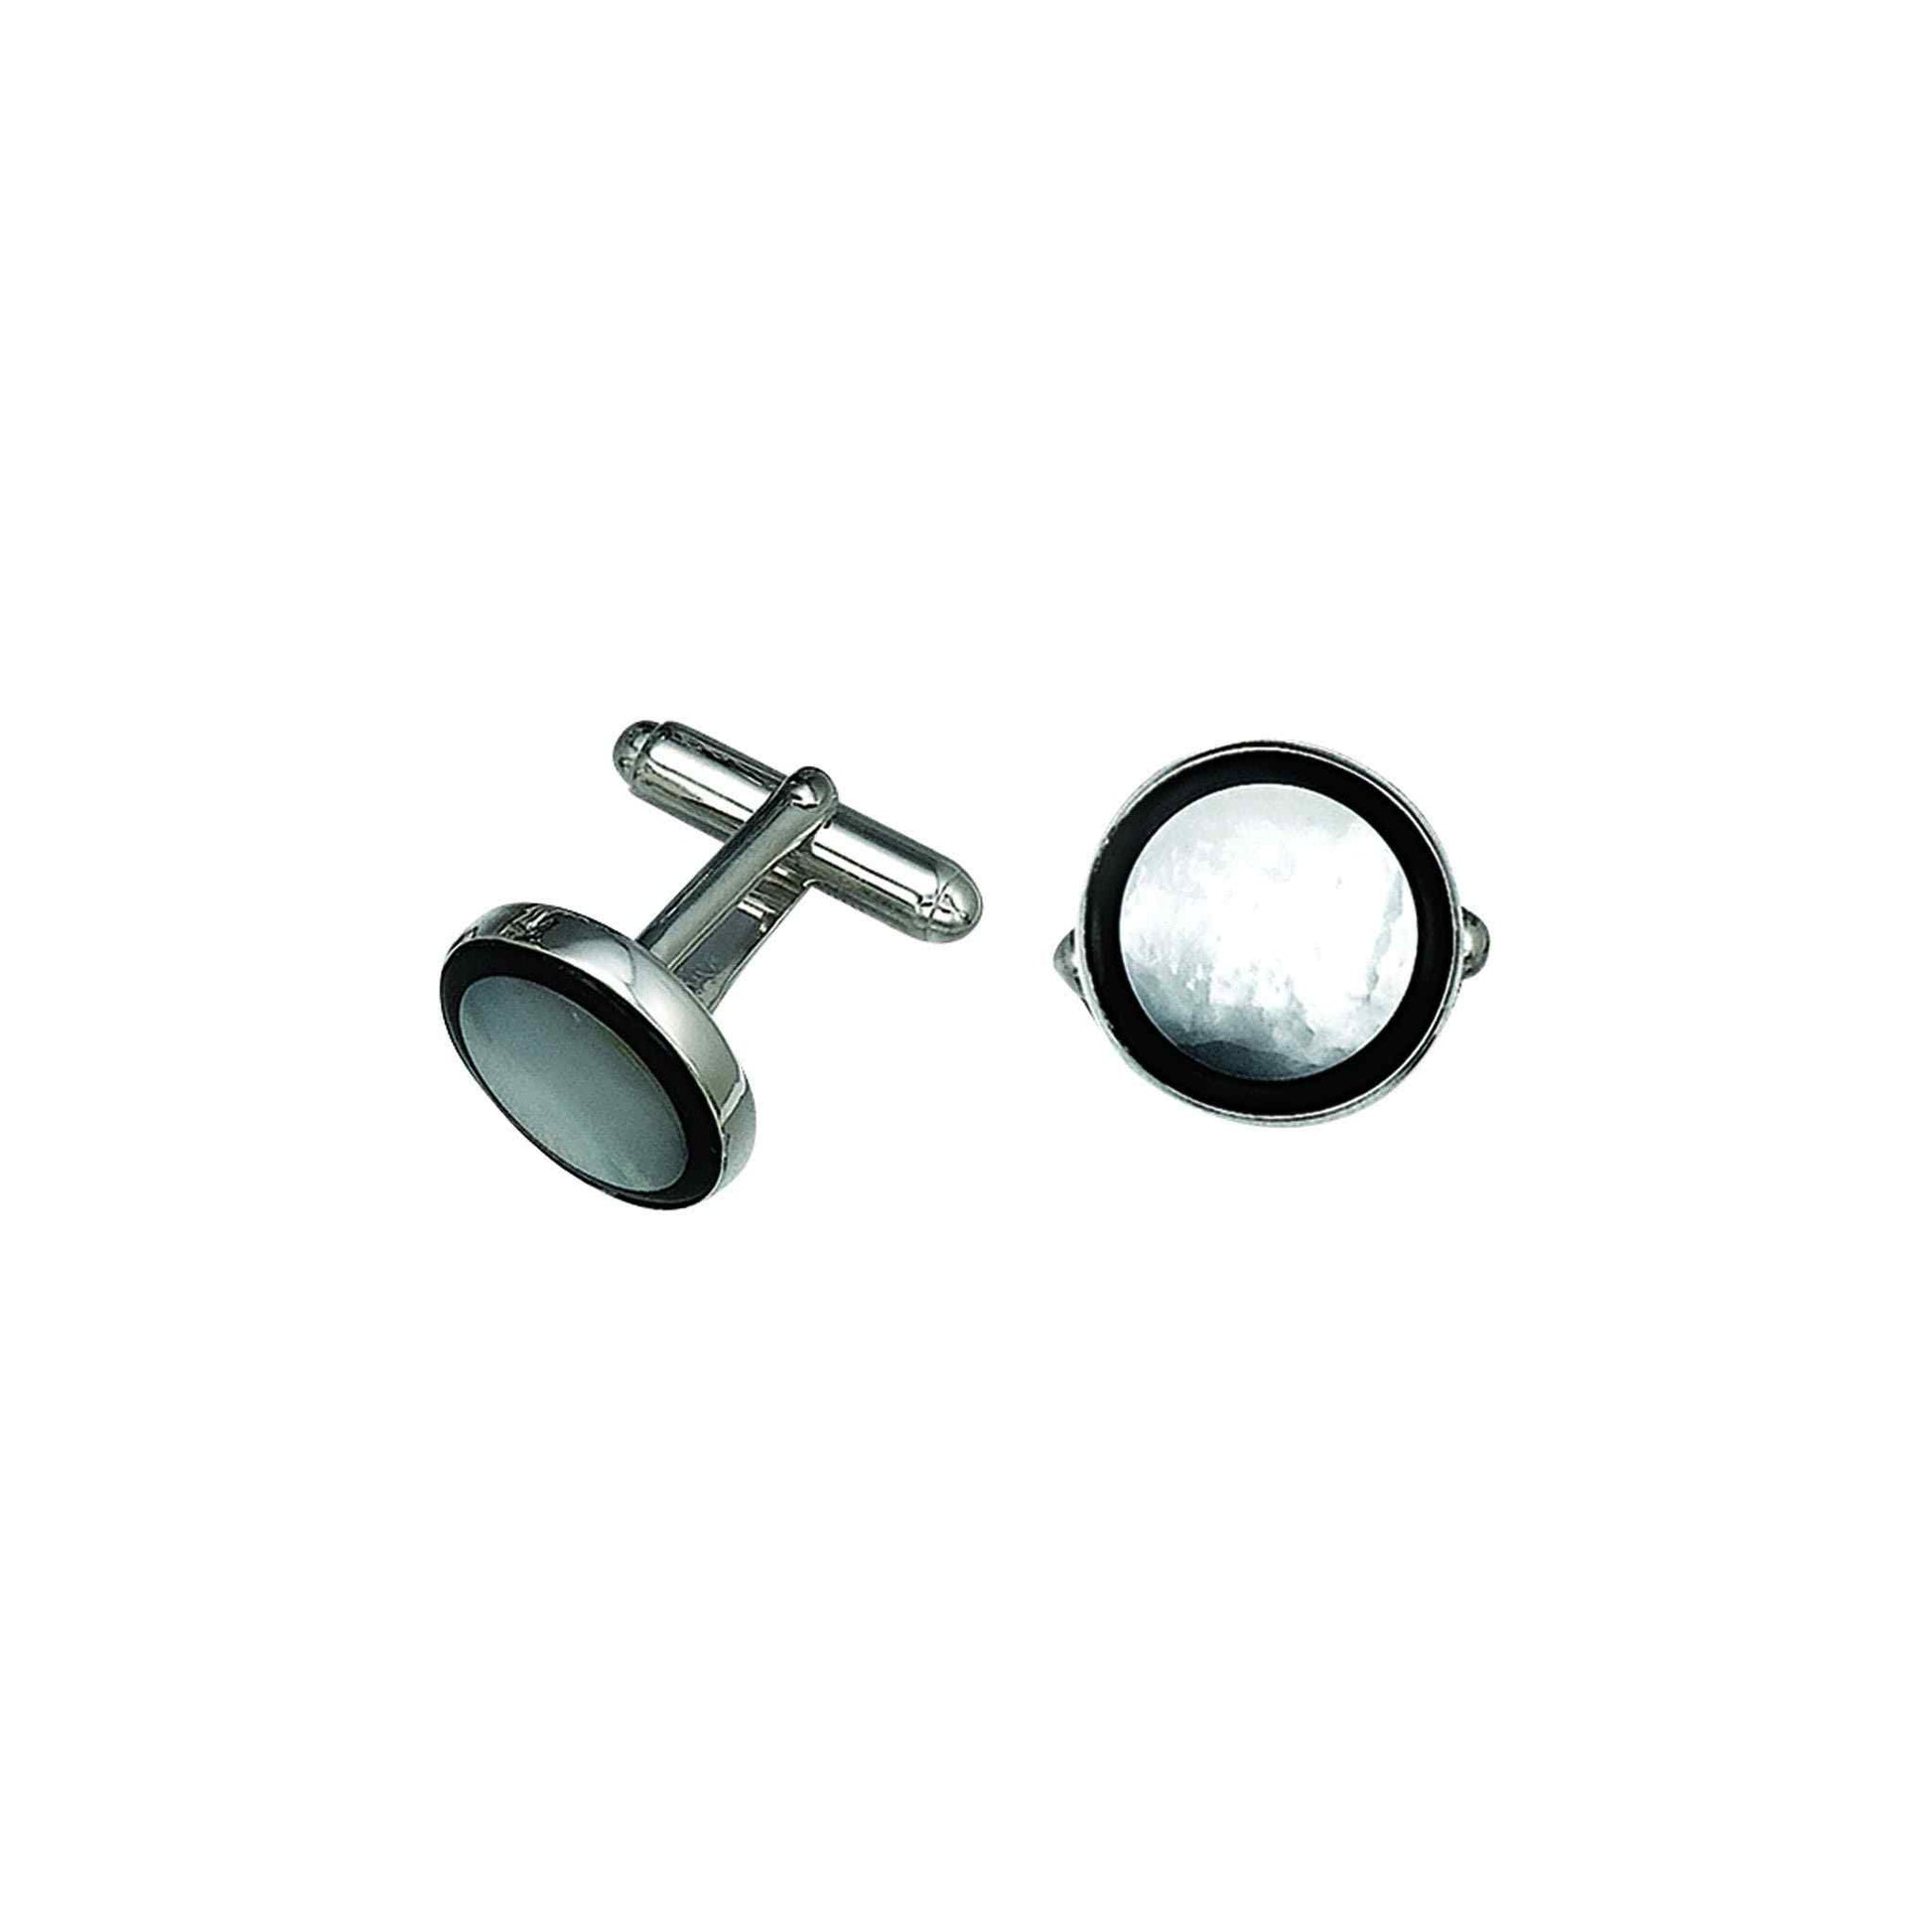 A 14k white gold round mother of pearl & onyx trim cufflinks displayed on a neutral white background.